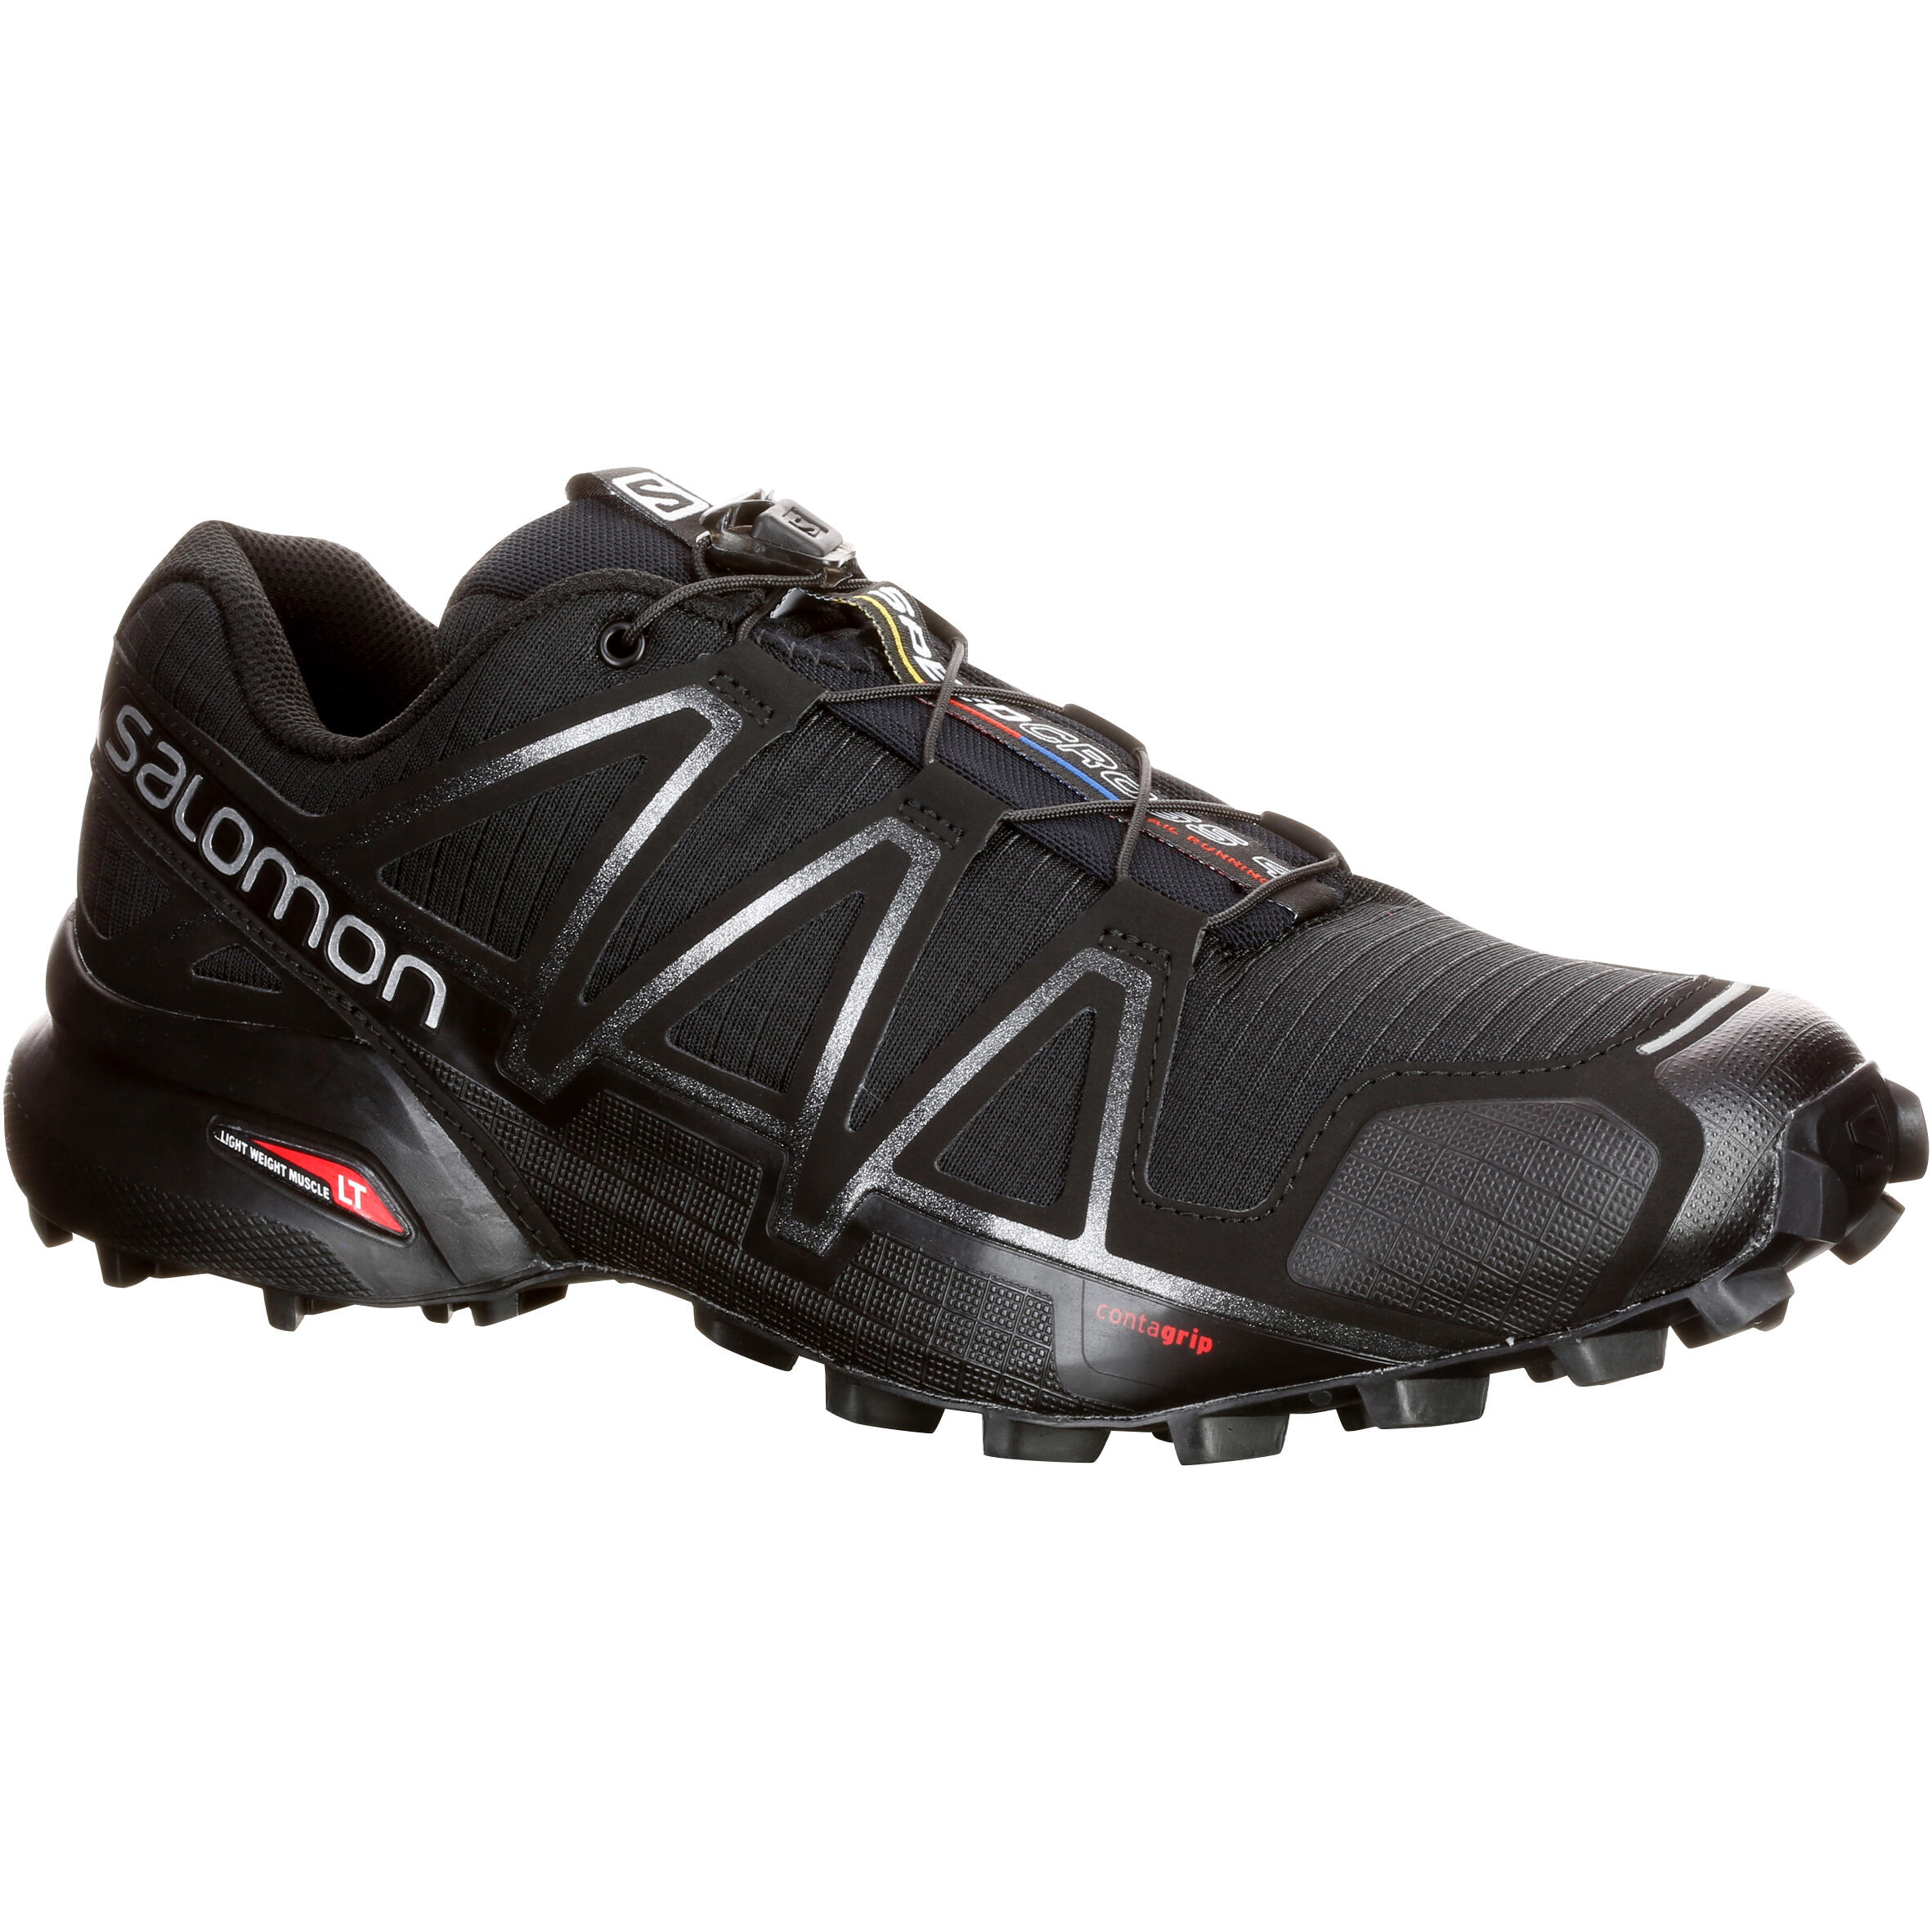 salomon speedcross decathlon Cheaper Than Retail Price\u003e Buy Clothing,  Accessories and lifestyle products for women \u0026 men -